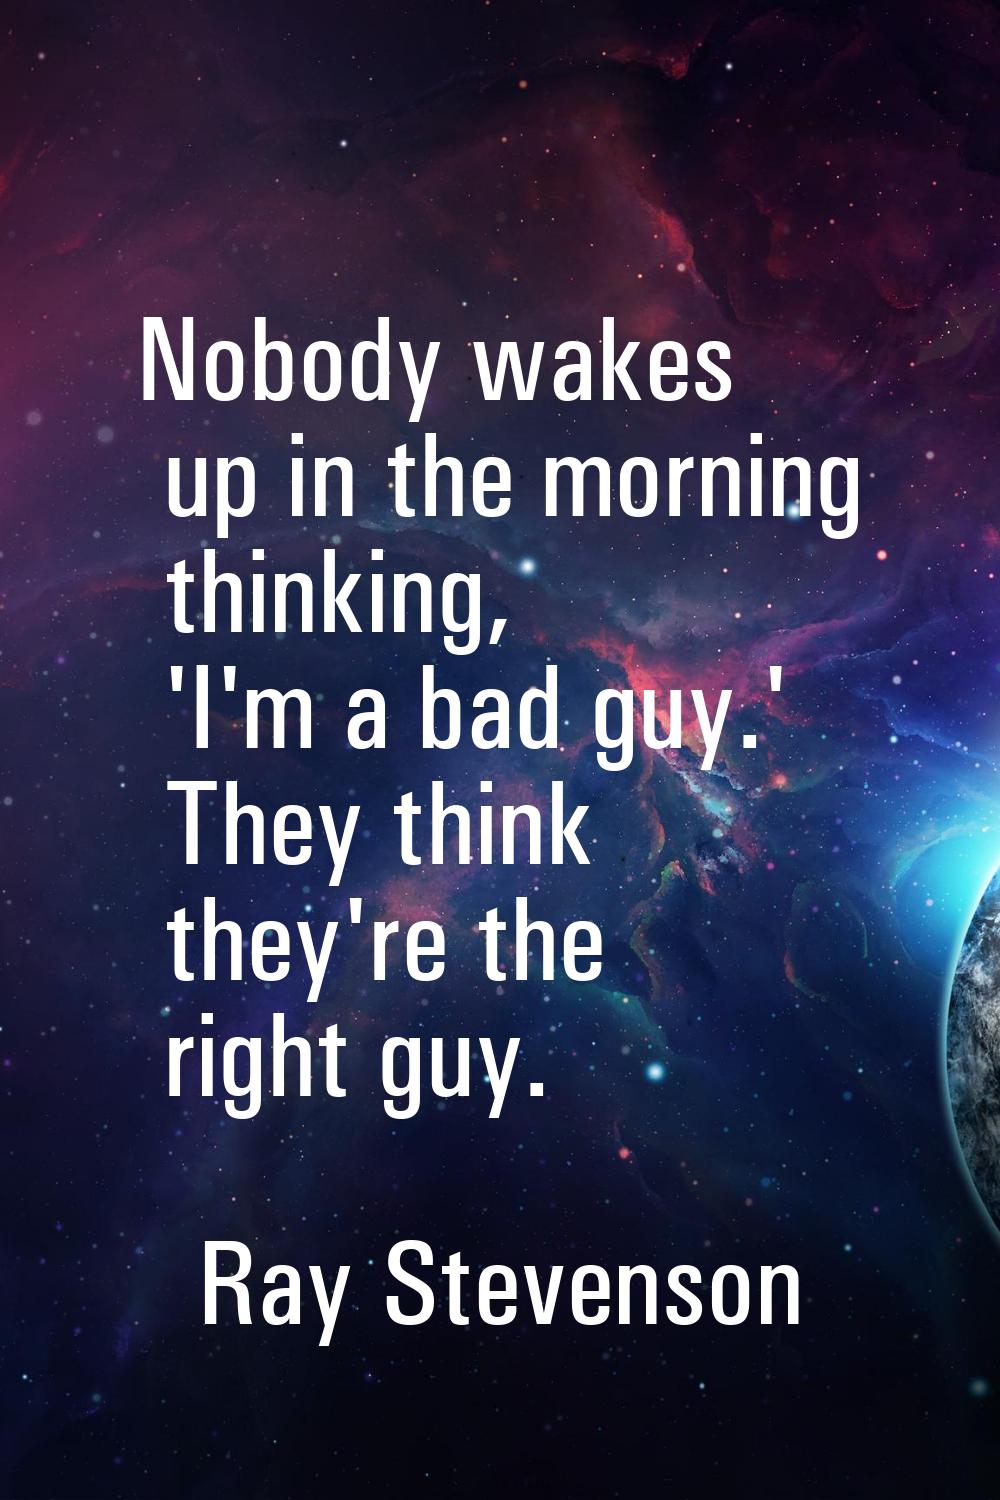 Nobody wakes up in the morning thinking, 'I'm a bad guy.' They think they're the right guy.